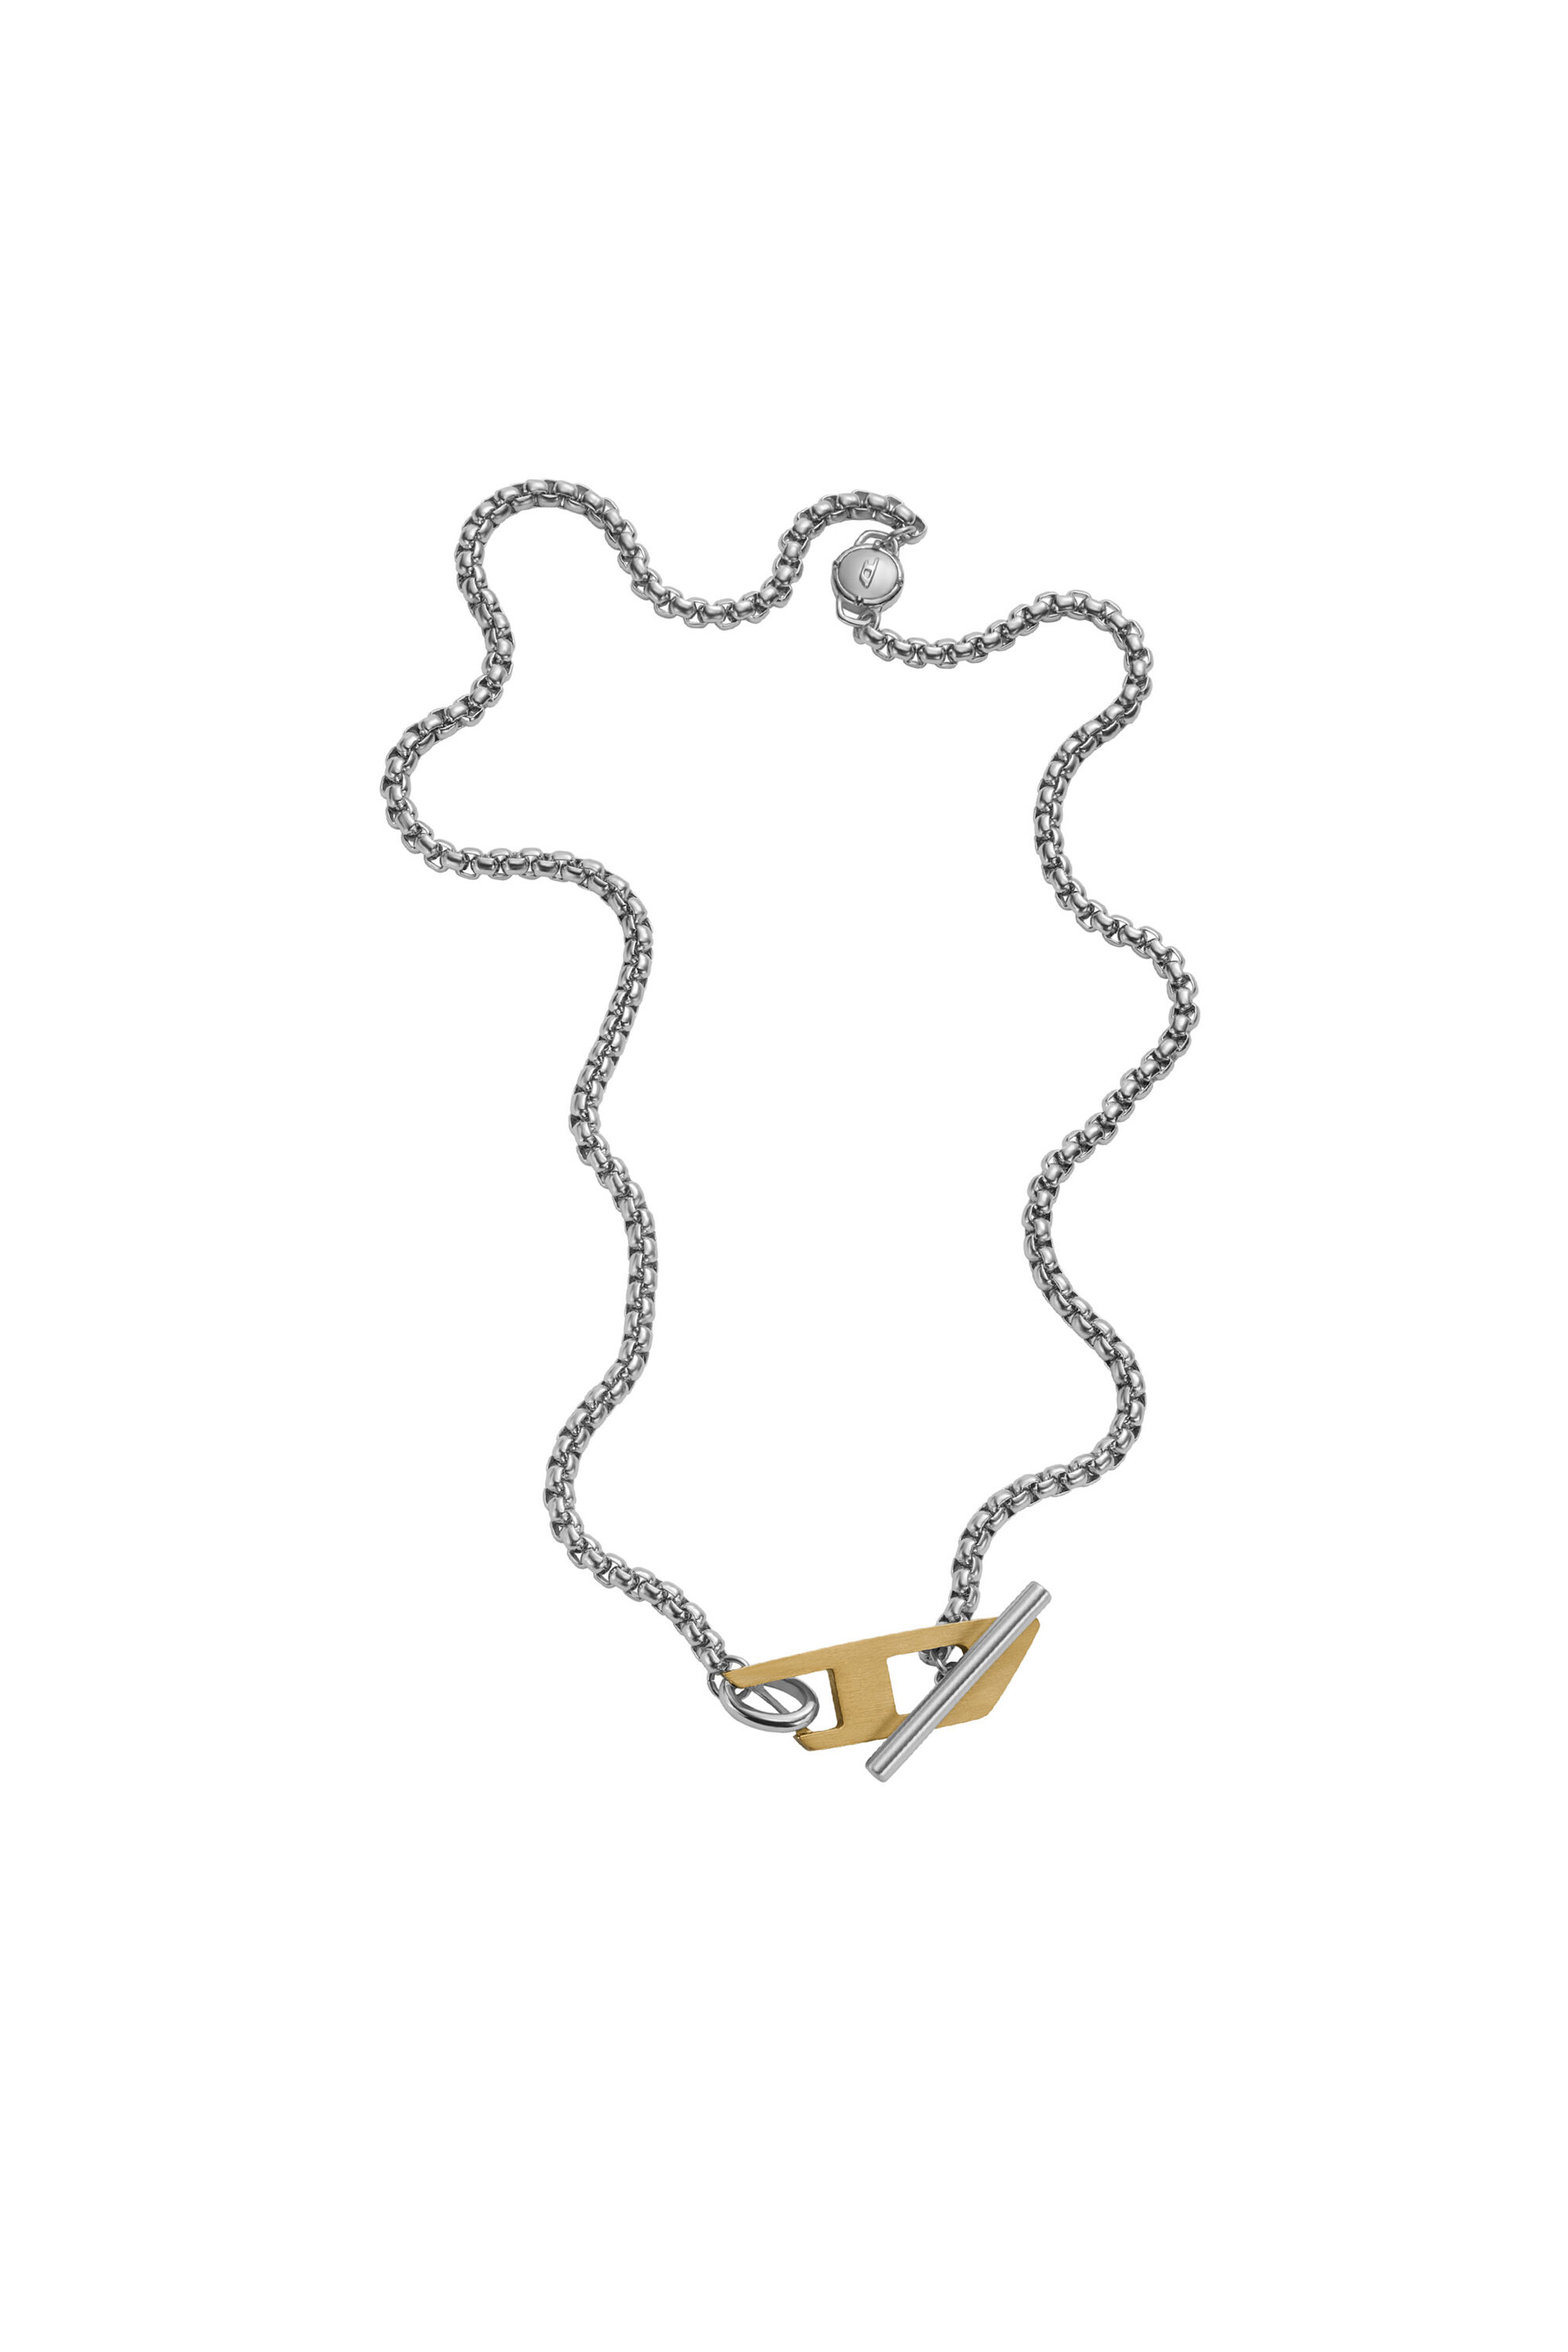 DX1378: Two-Tone Stainless Steel Choker Necklace | Diesel